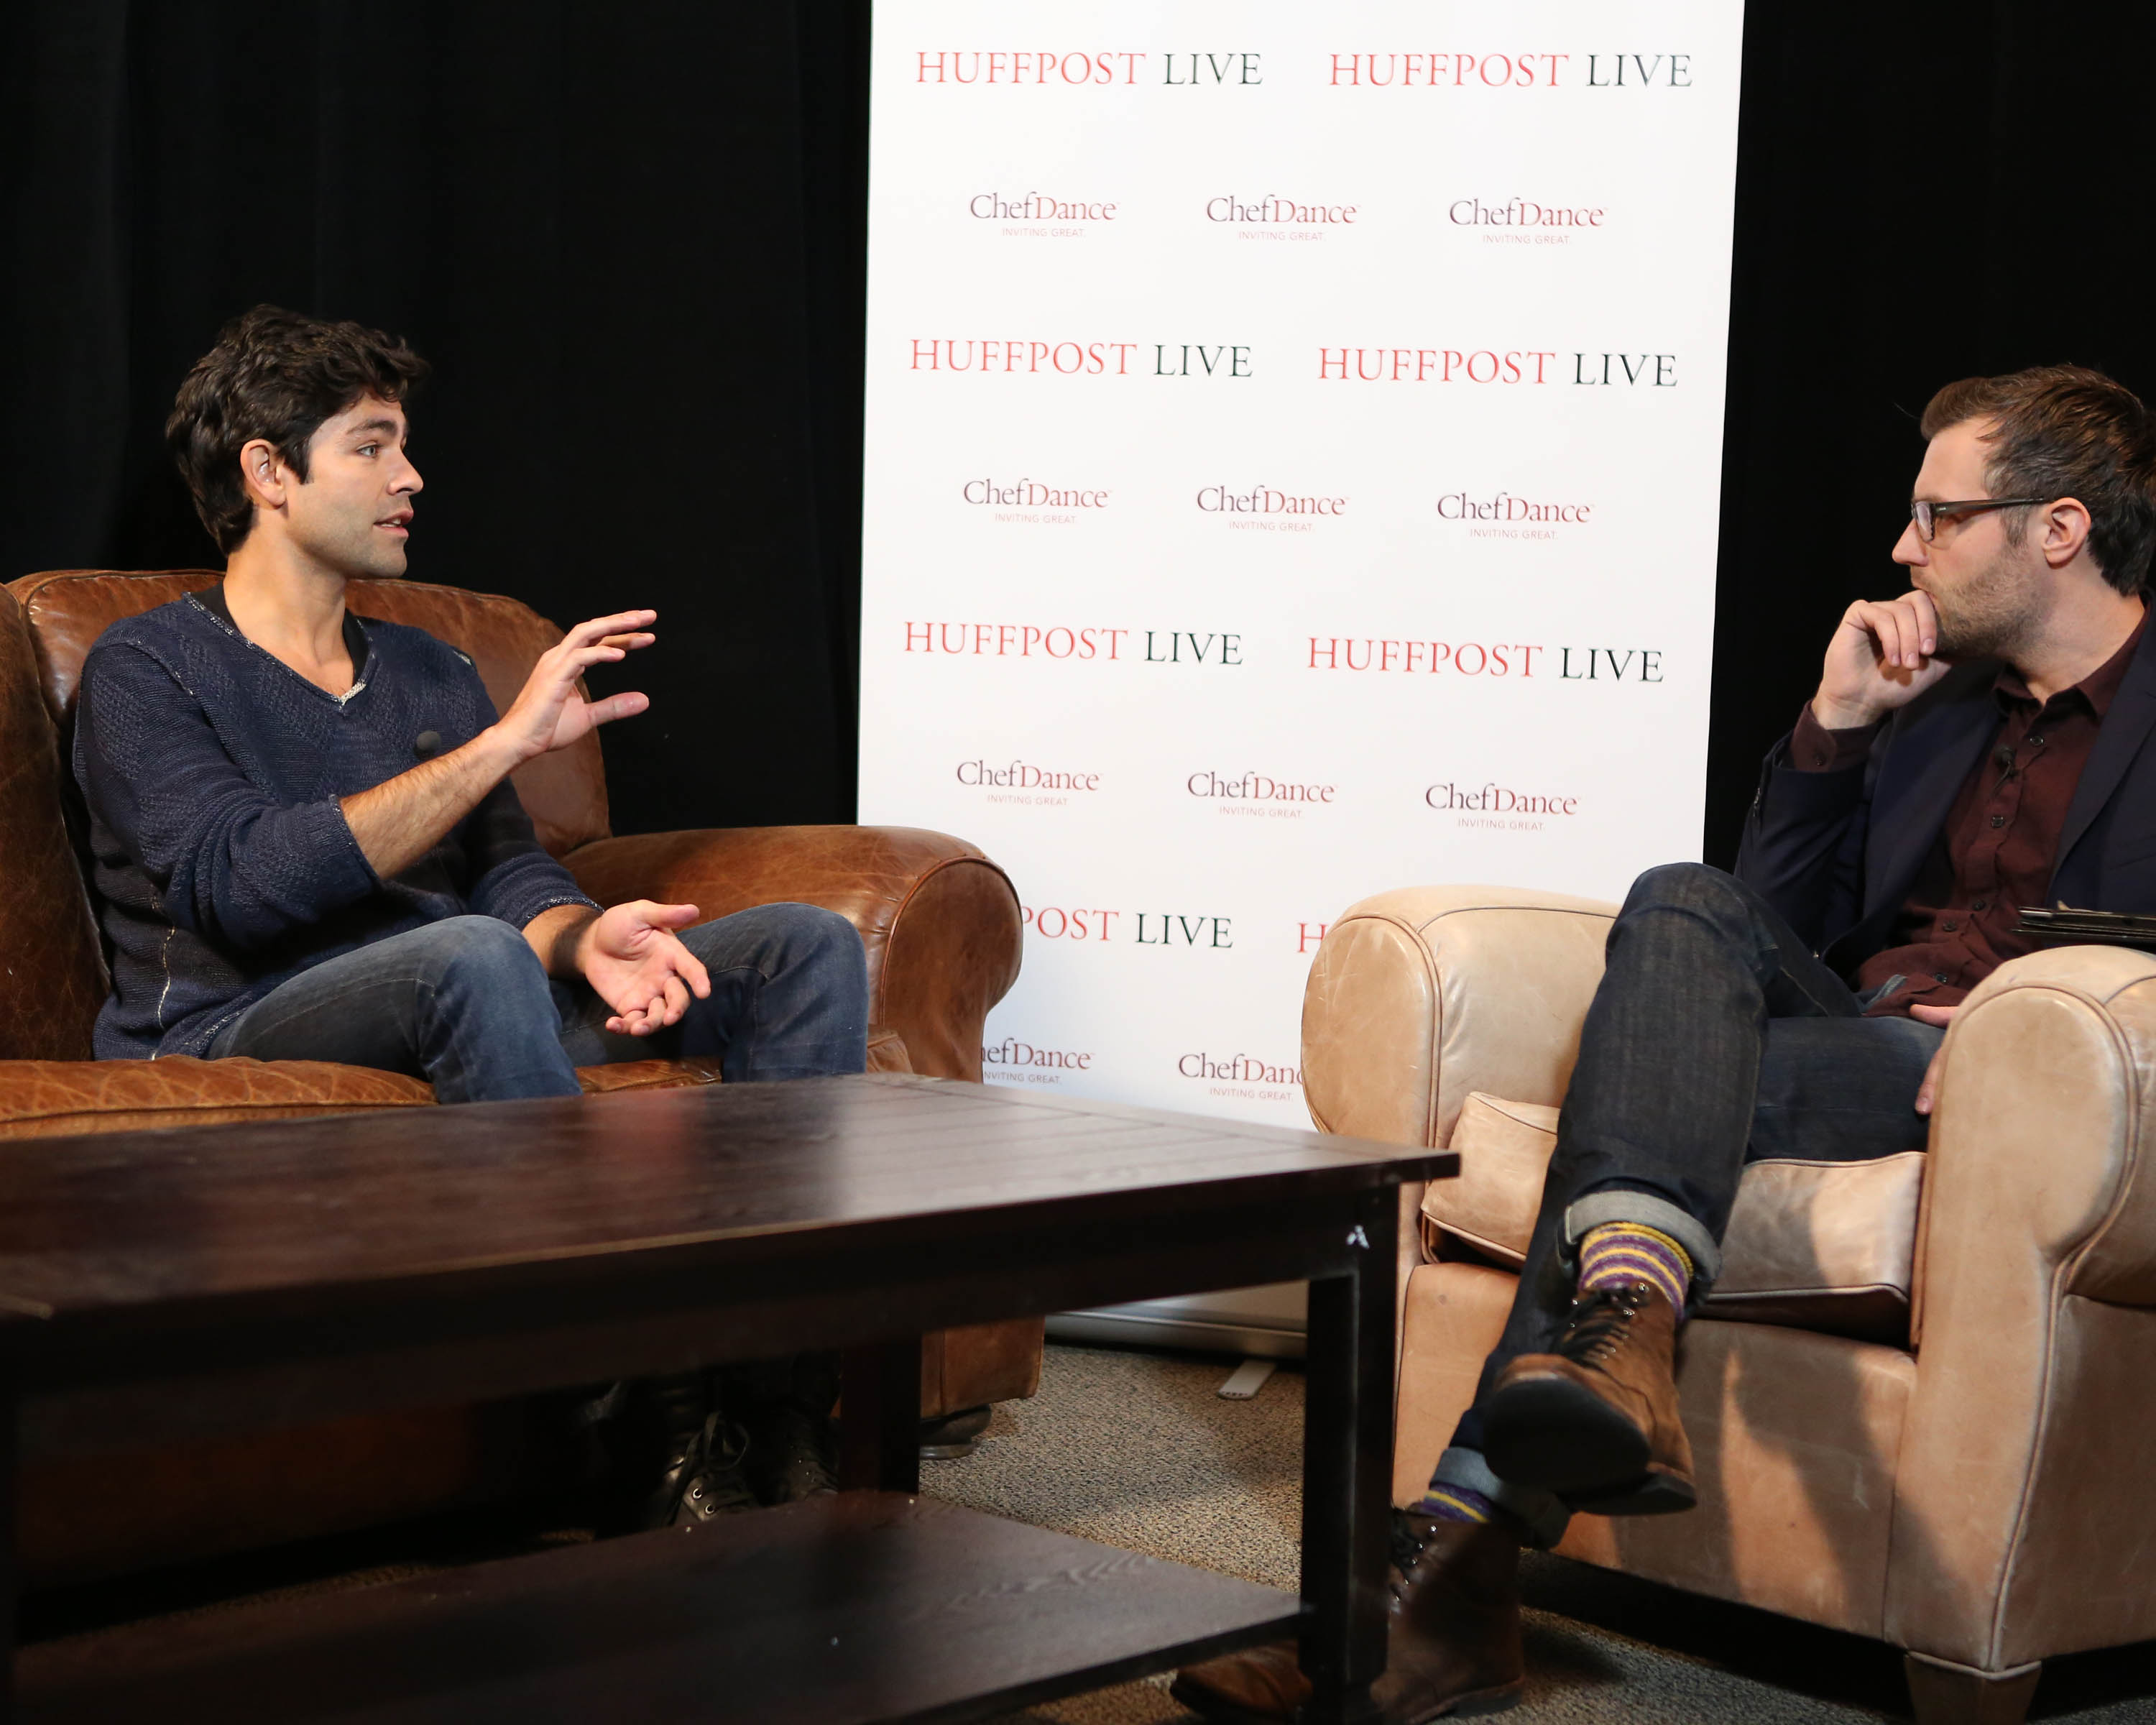 Adrian Grenier discussing his whale project with HuffPost Live at ChefDance Media Lounge